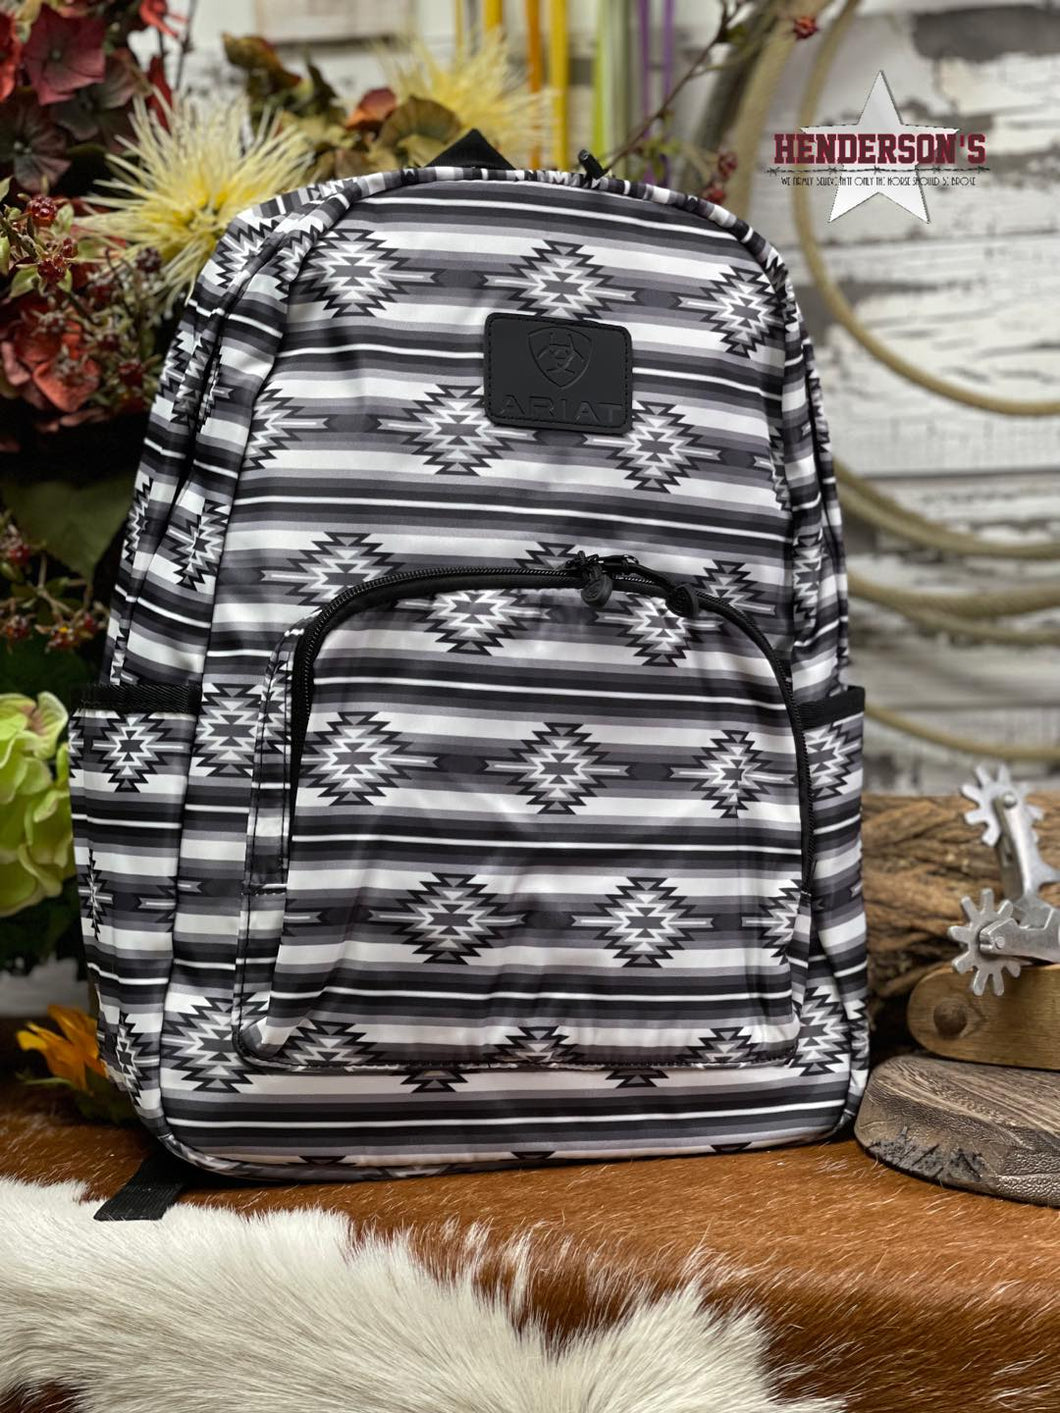 Ariat Aztec Back Pack - Henderson's Western Store